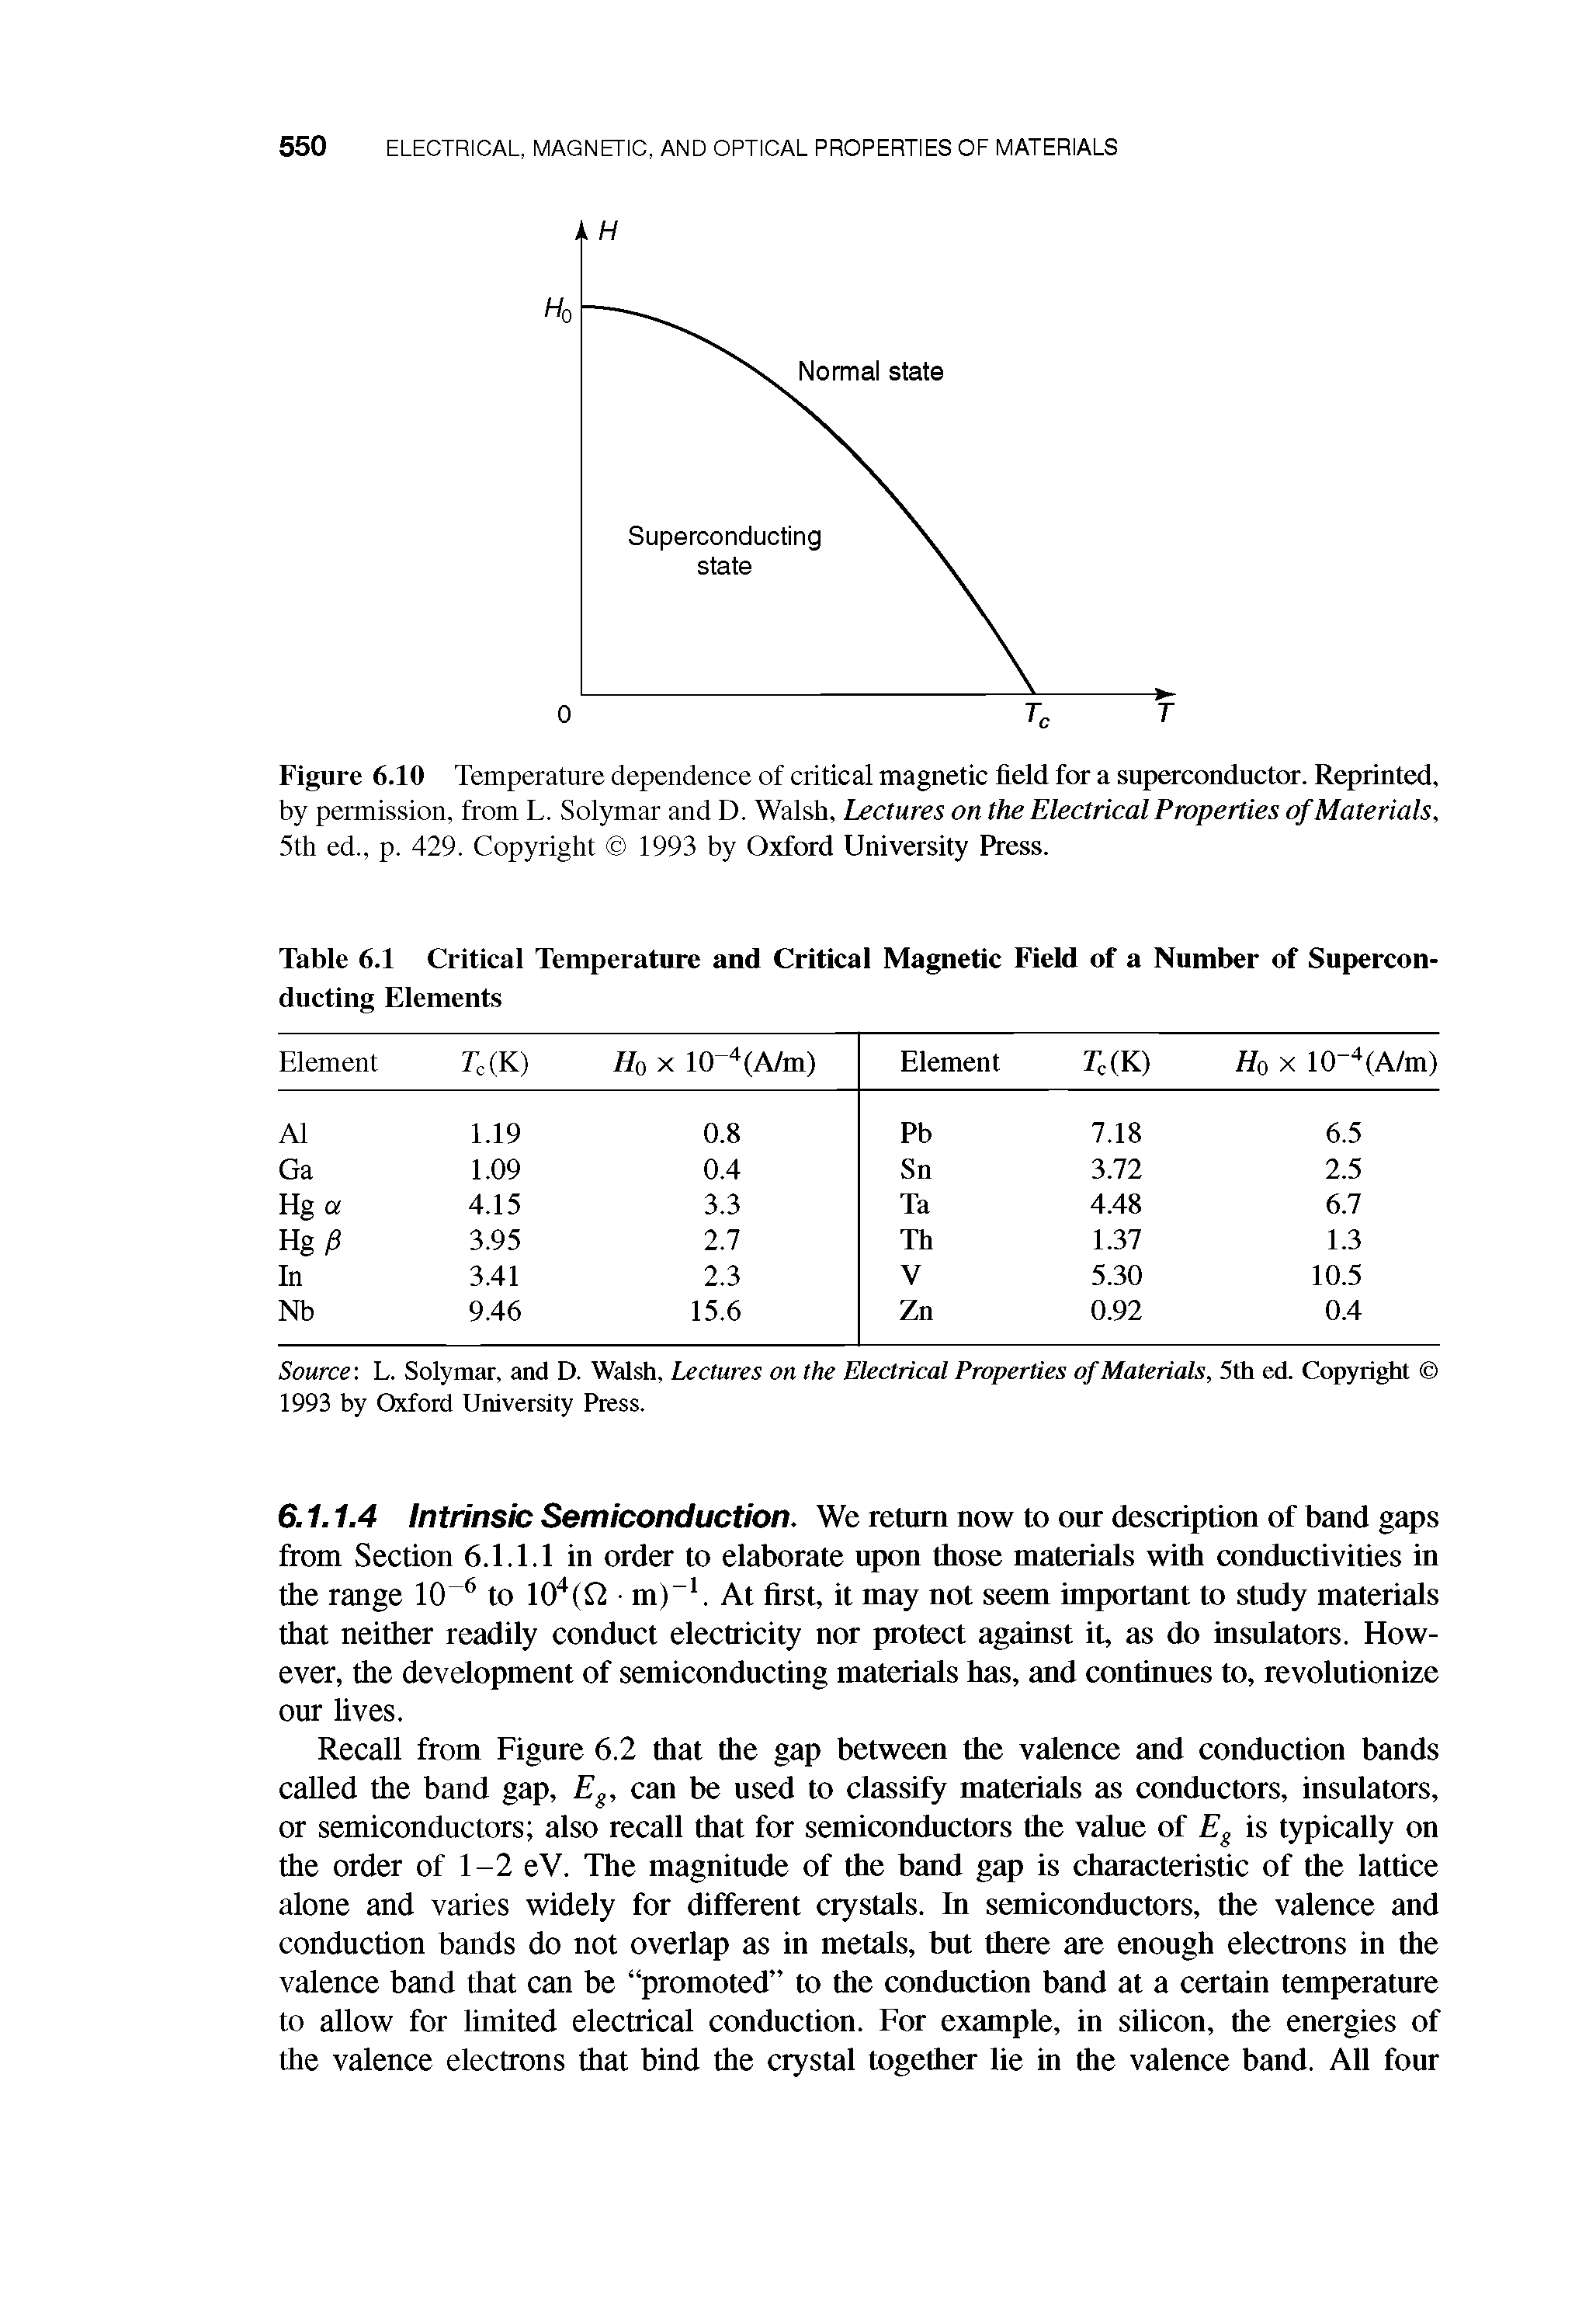 Figure 6.10 Temperature dependence of critical magnetic field for a superconductor. Reprinted, by permission, from L. Solymar and D. Walsh, Lectures on the Electrical Properties of Materials, 5th ed., p. 429. Copyright 1993 by Oxford University Press.